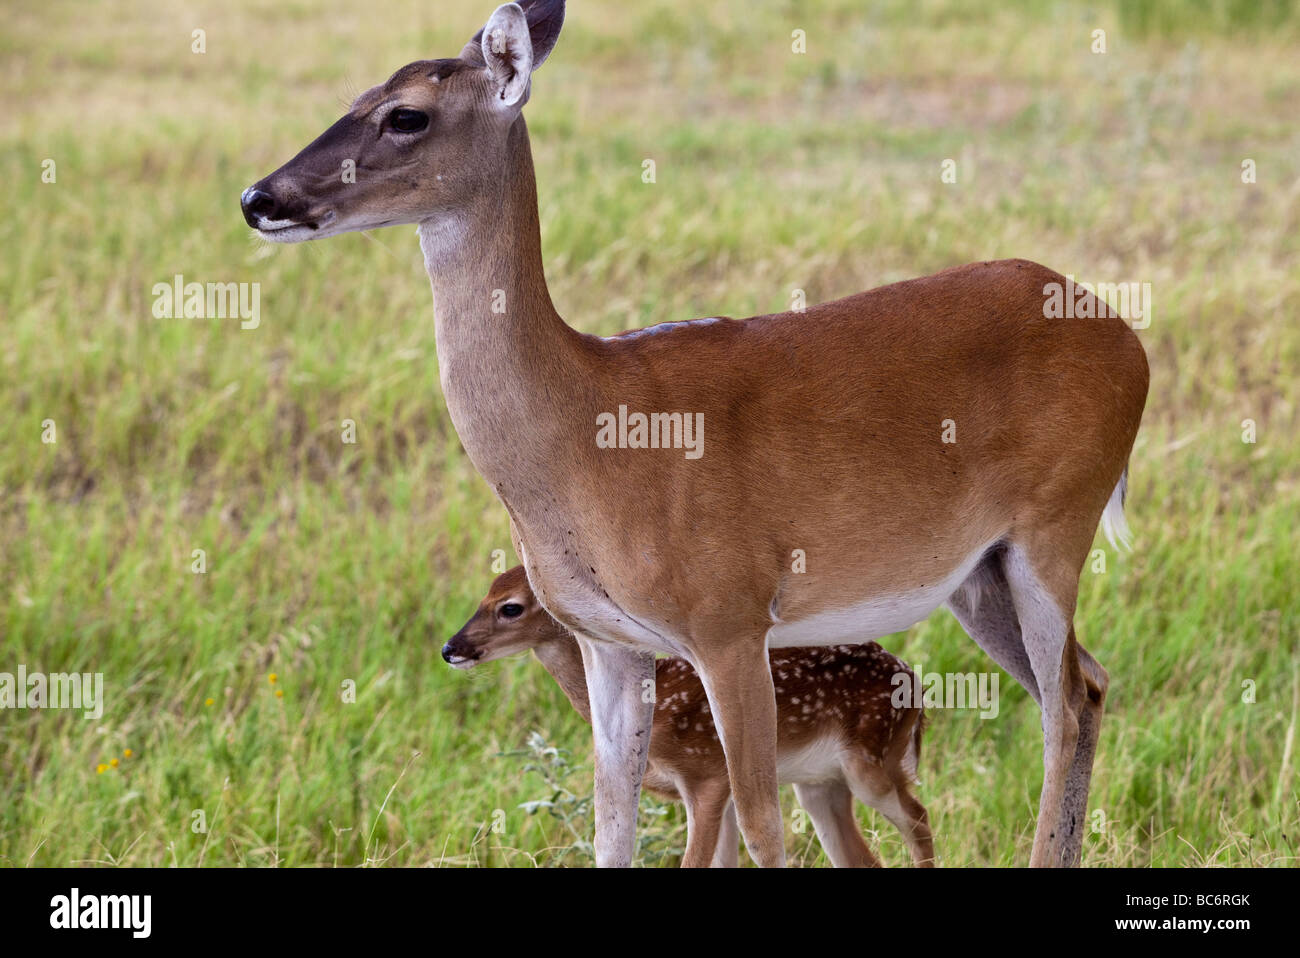 A doe and fawn White-tailed Deer, Odocoileus virginianus, native to the United States at Fossil Rim Wildlife Center Stock Photo